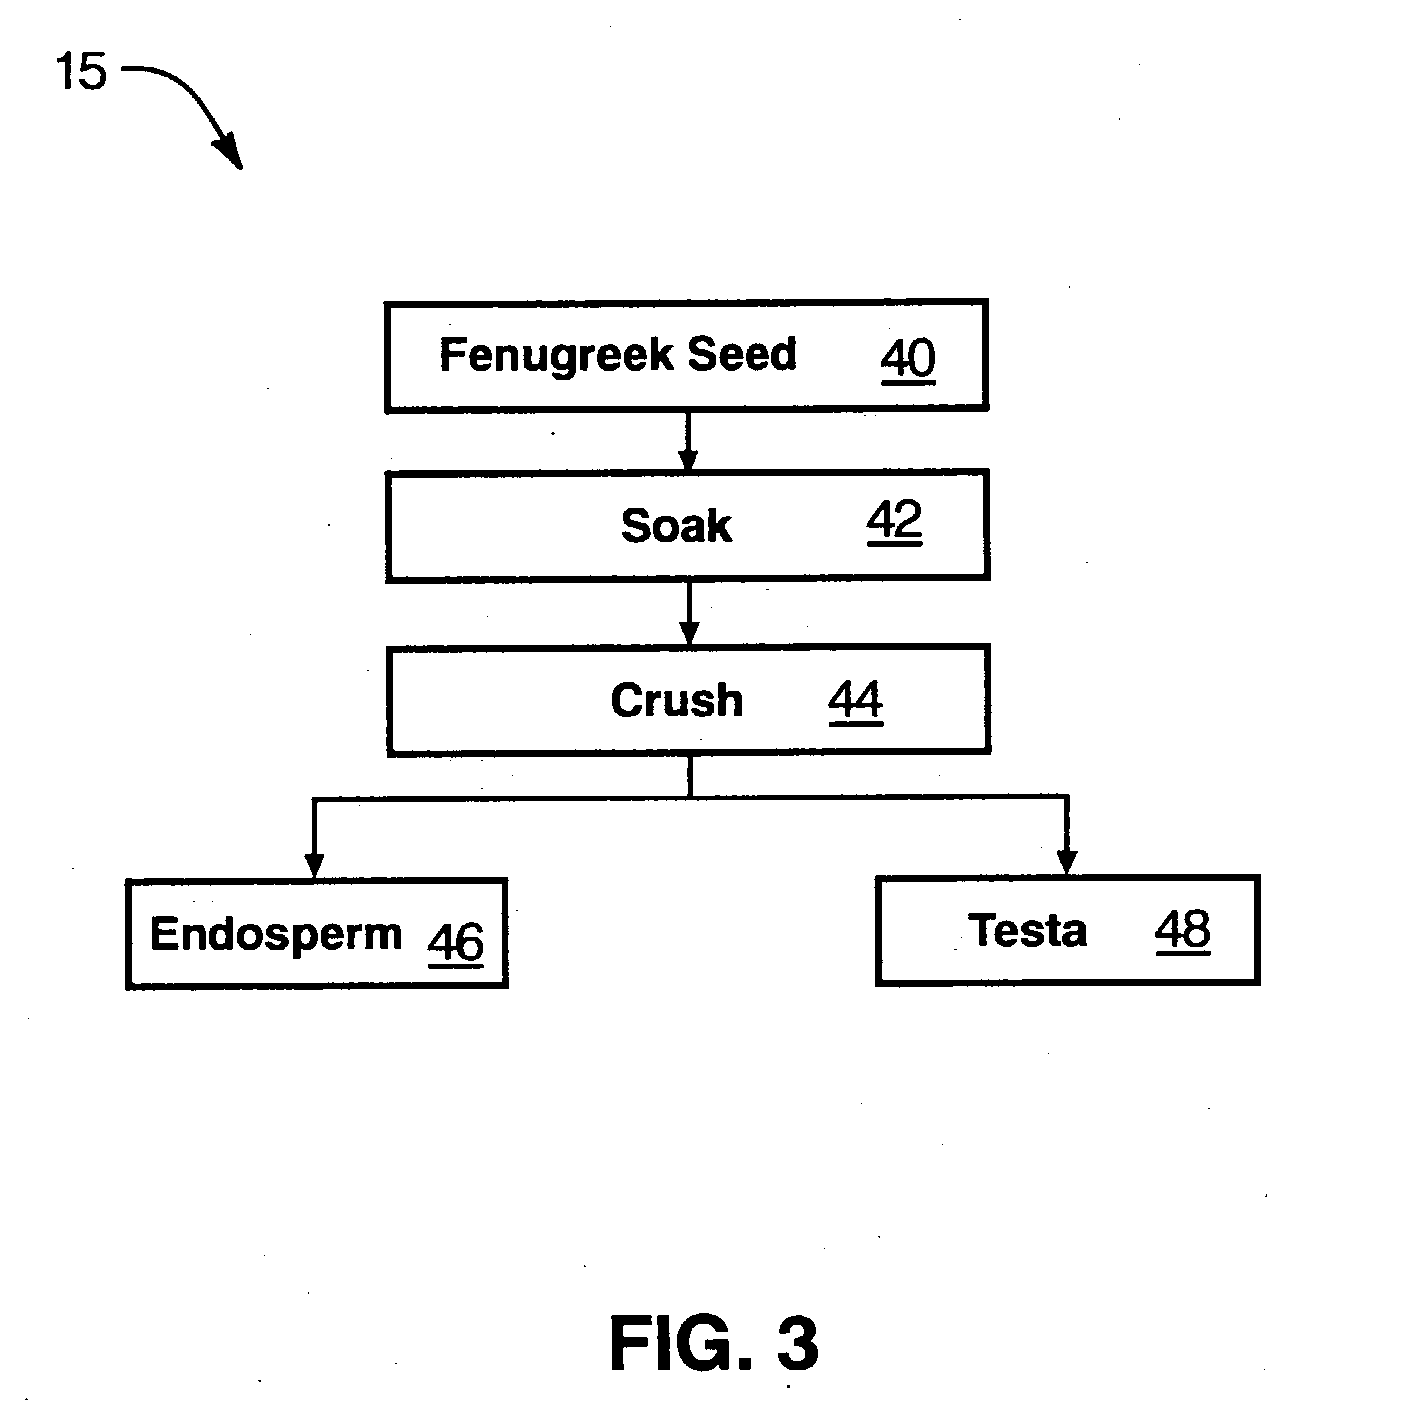 Fenugreek seed bio-active compositions and methods for extracting same